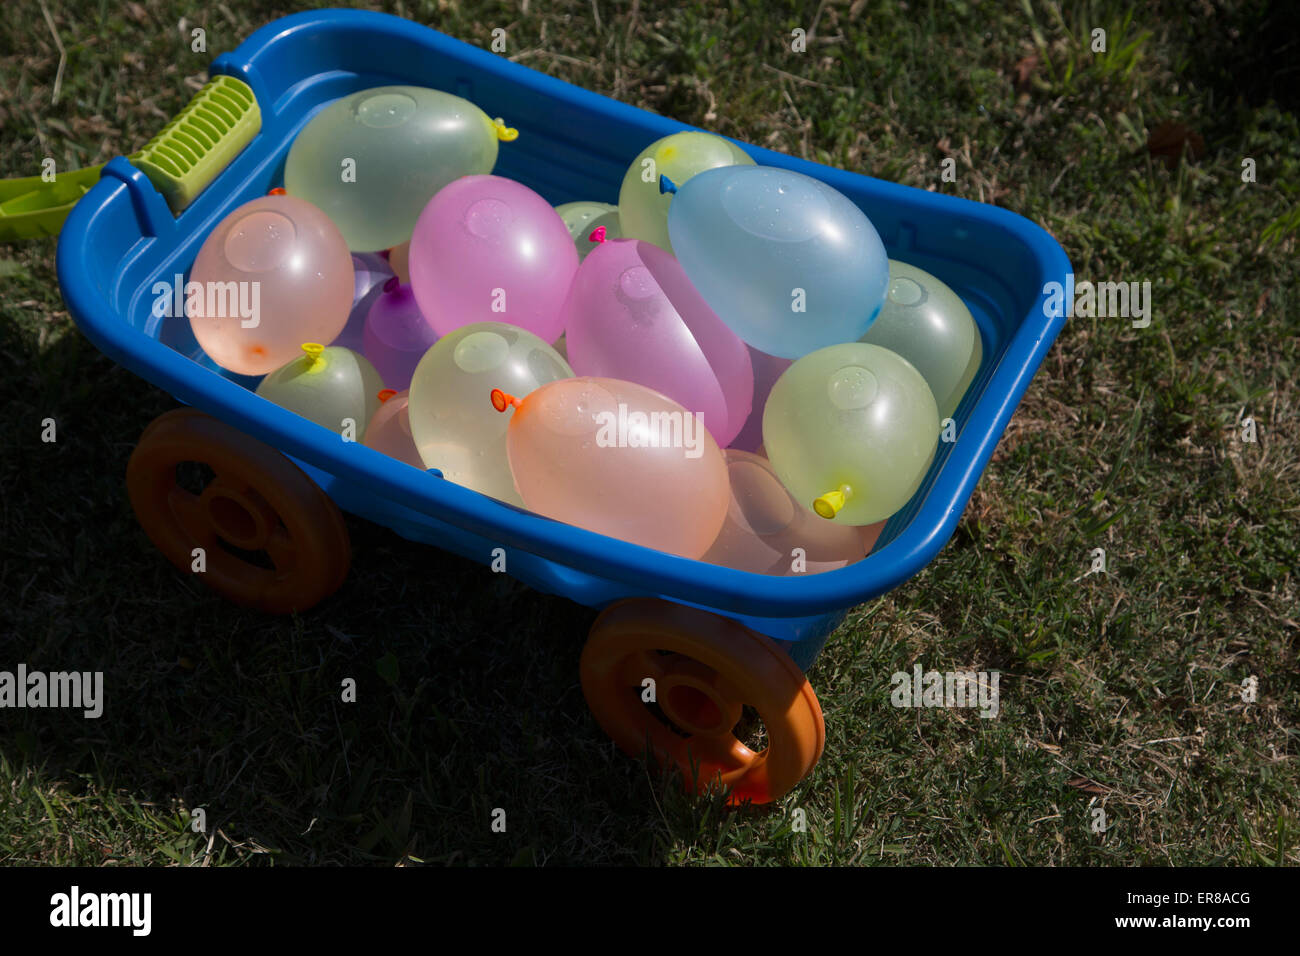 Toy wheelbarrow filled with water balloons at yard Stock Photo